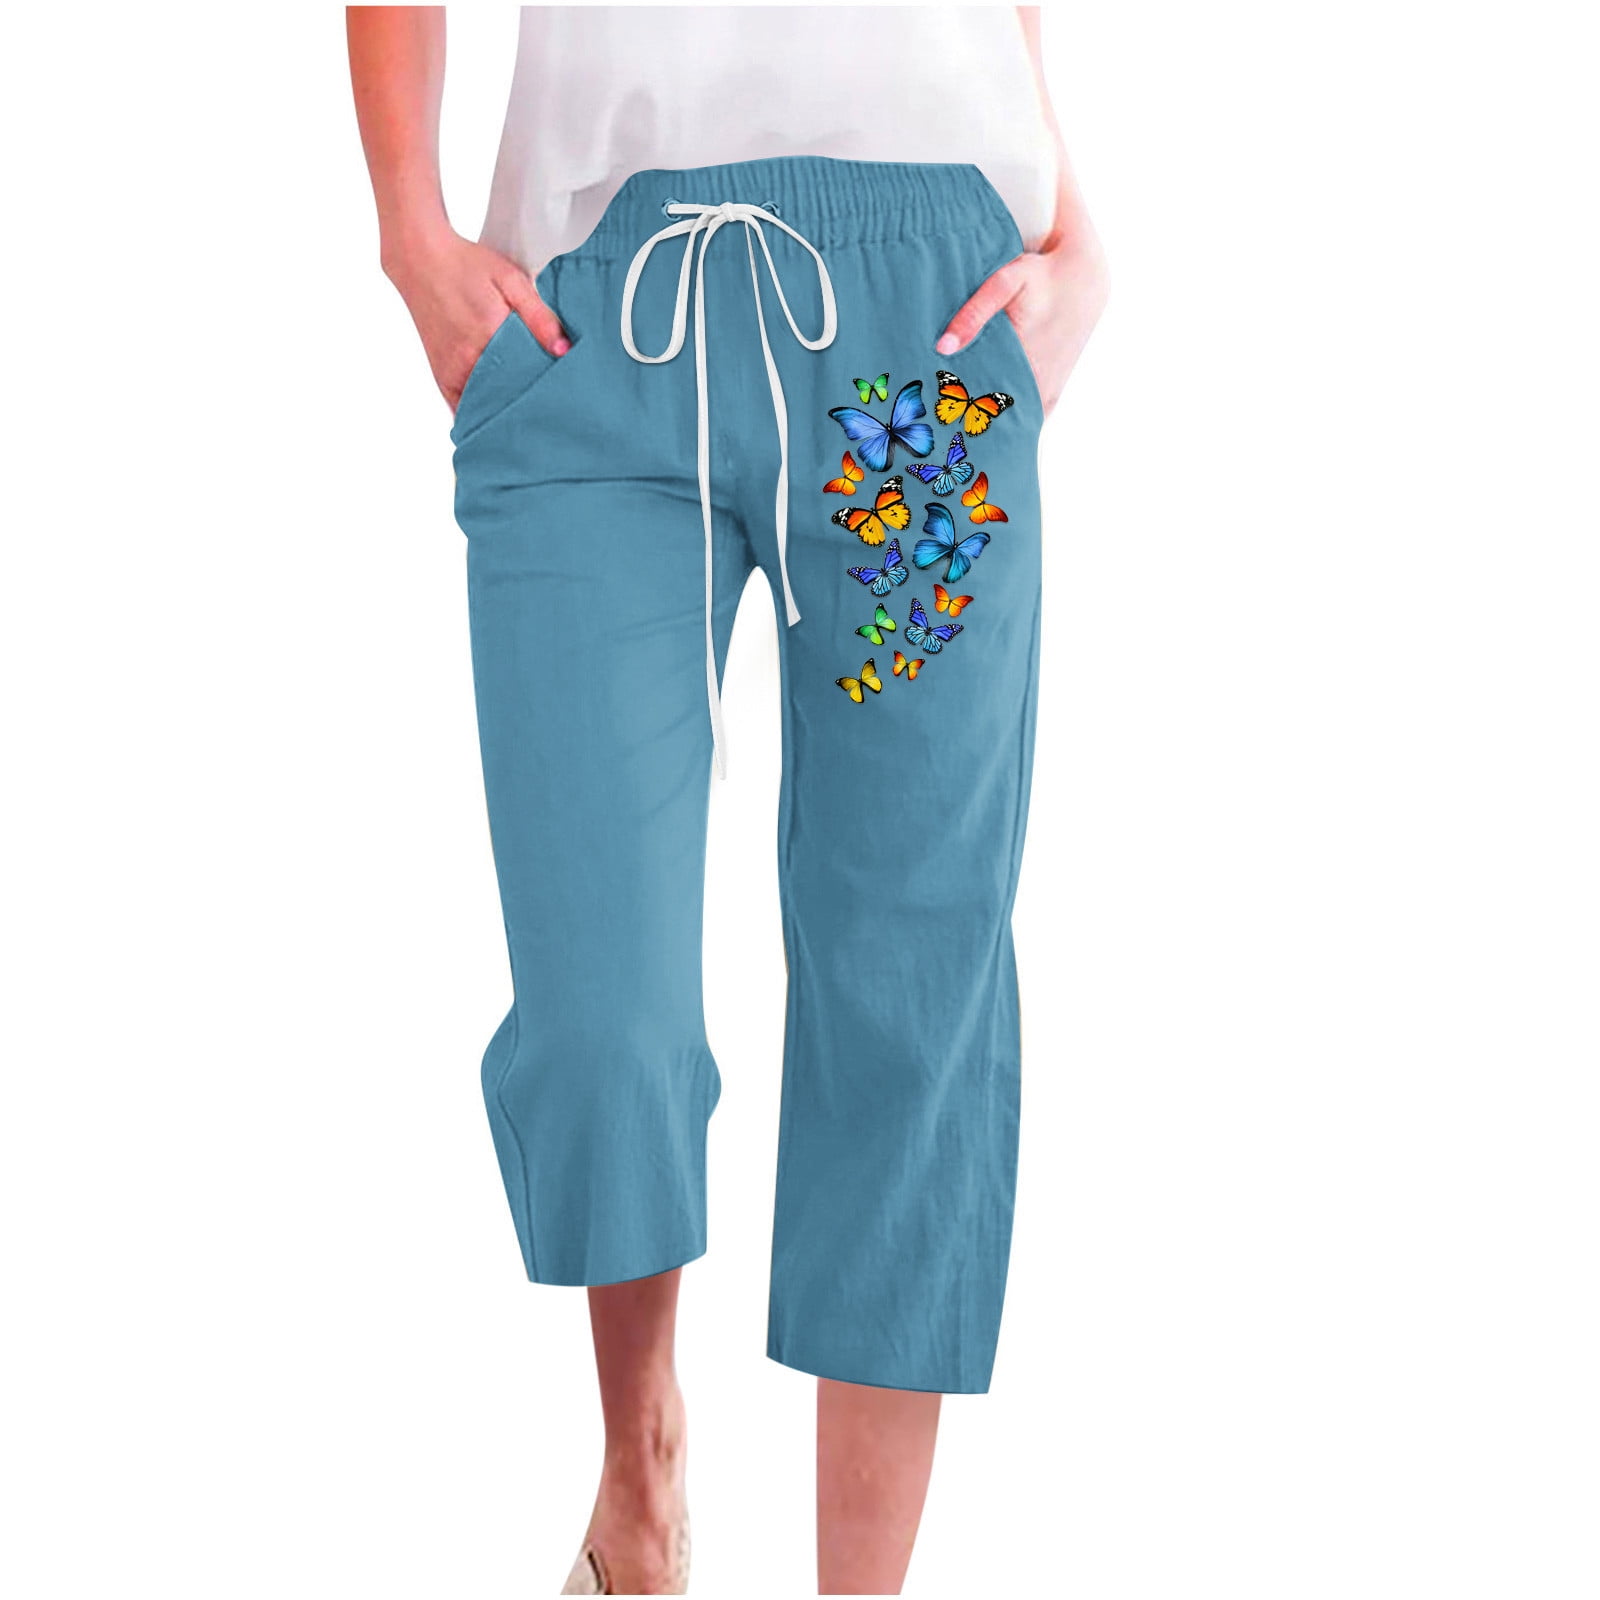 ZQGJB Womens Wide Leg Capris Casual Butterfly Print Summer Elastic High  Waist Cotton Linen Carpi Pants Loose Comfy Cropped Lounge Trousers Dark  Blue